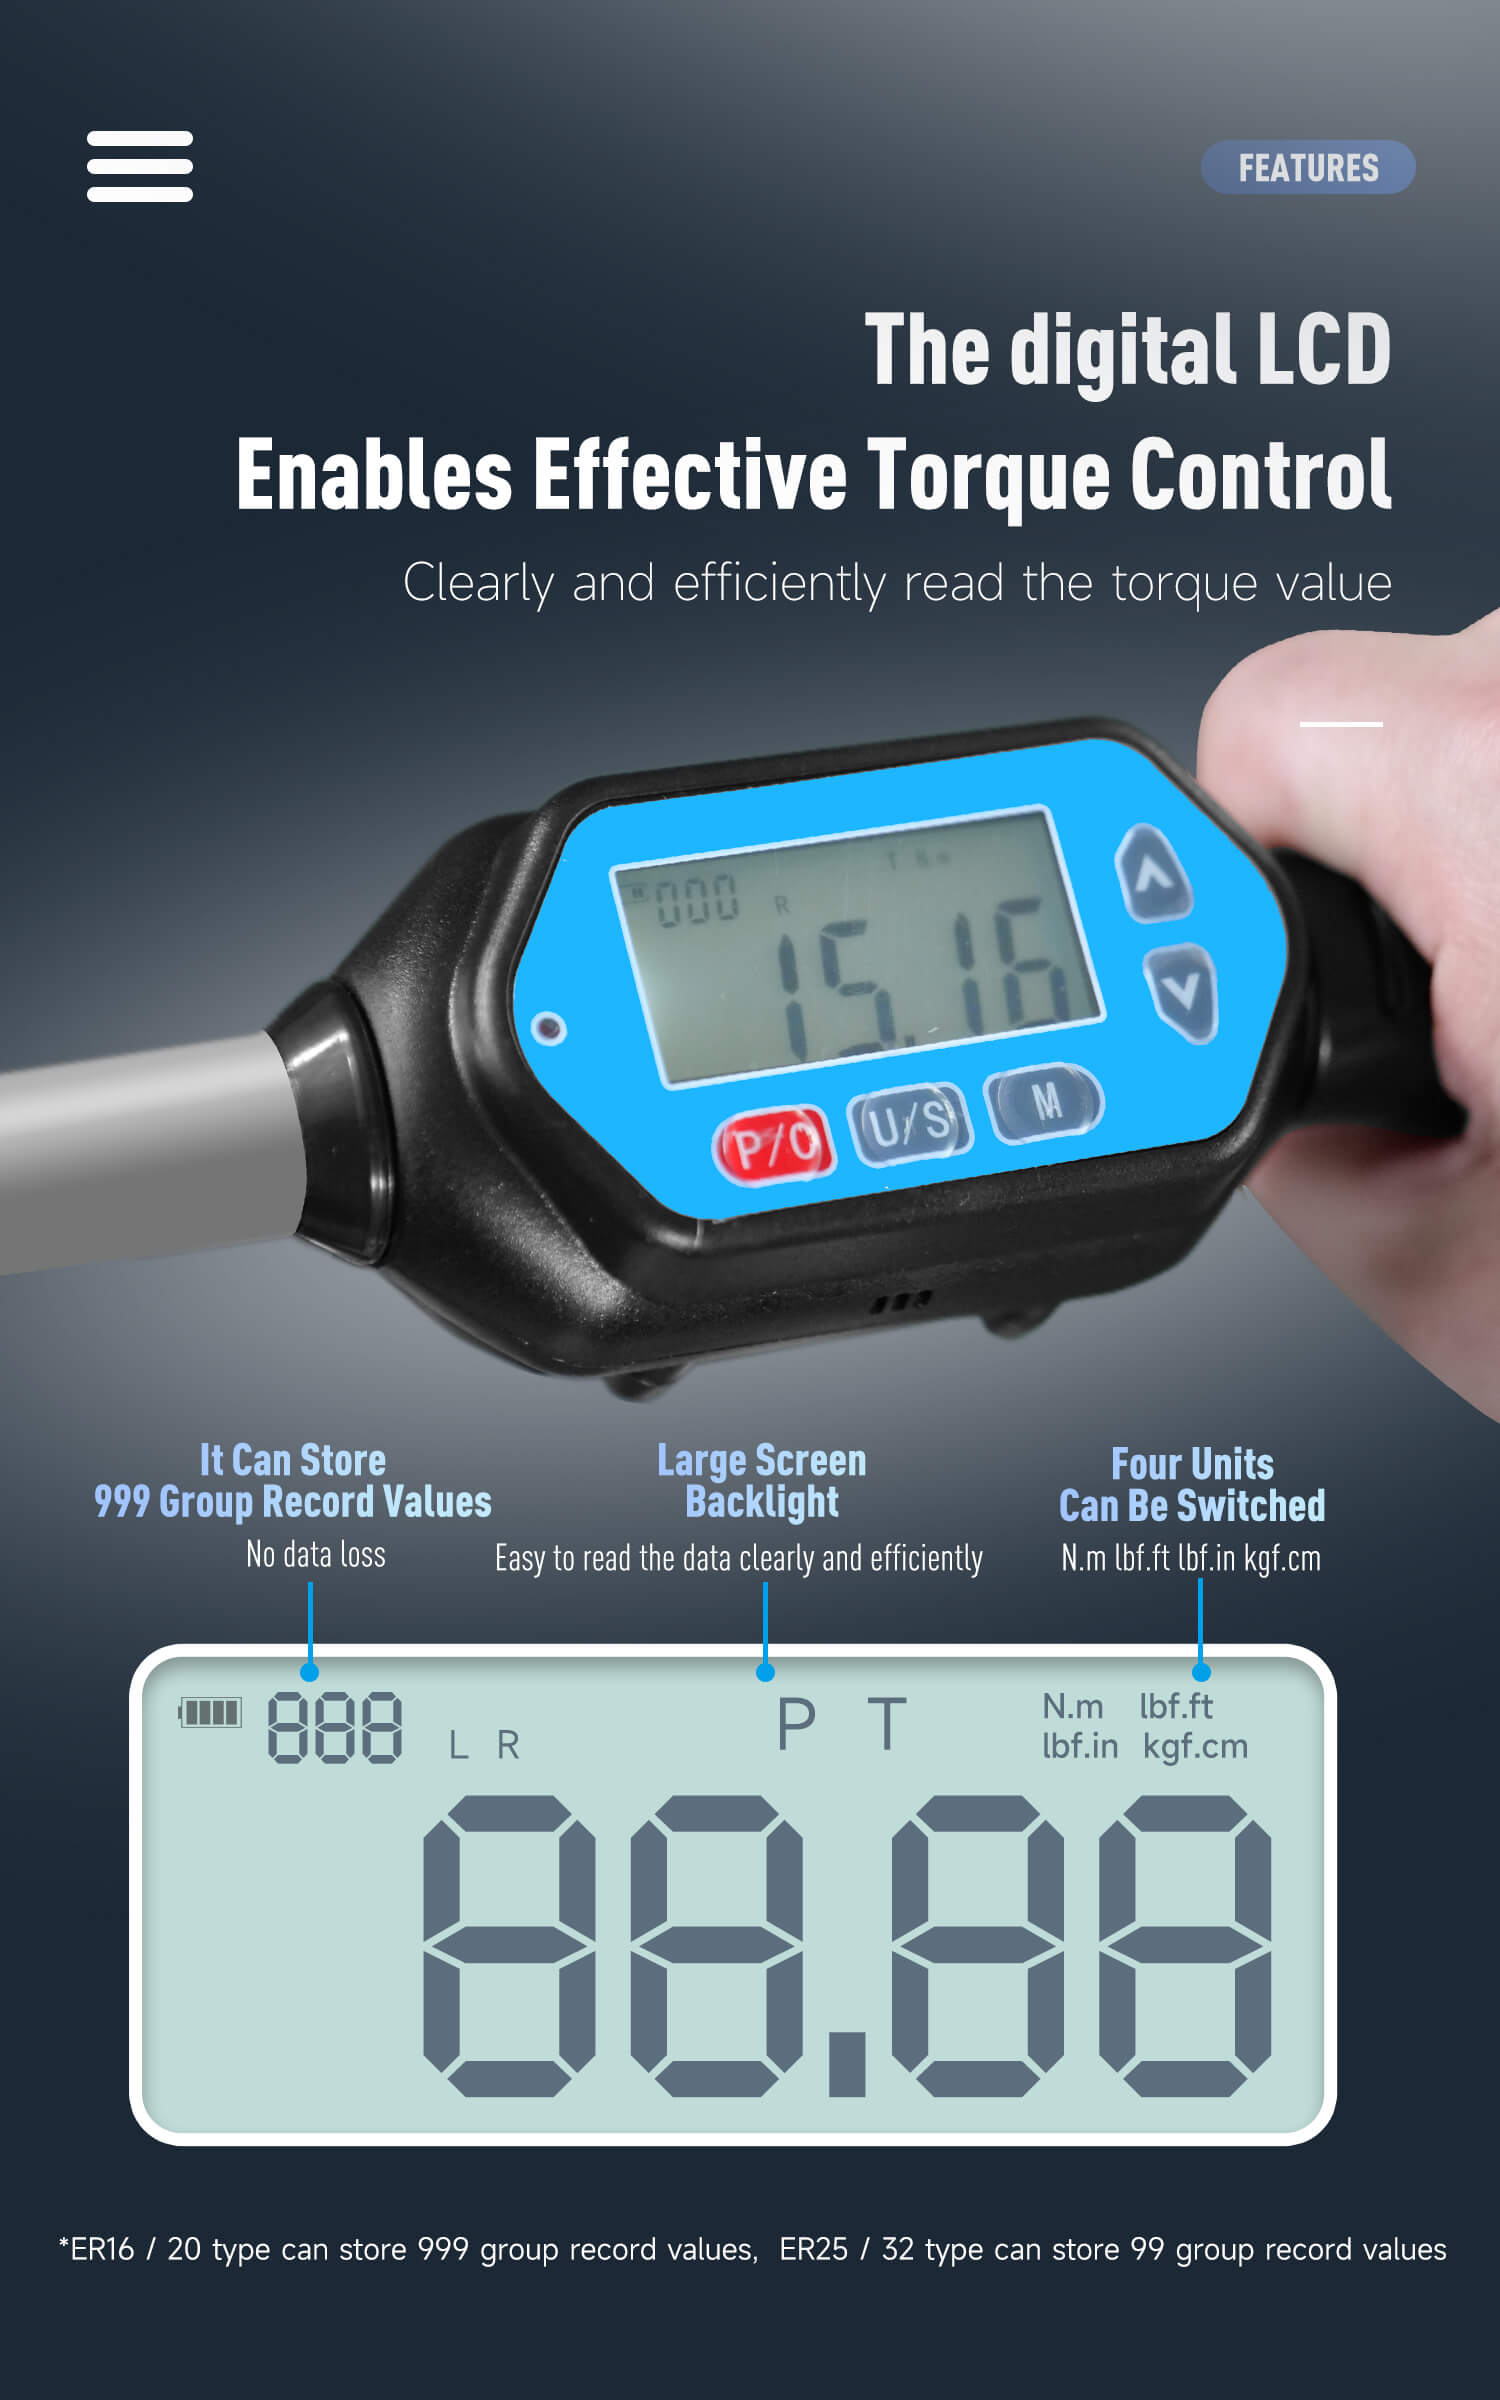 High Precision Digital Torque Wrench Made For Tightening and Removing ER20 Nuts